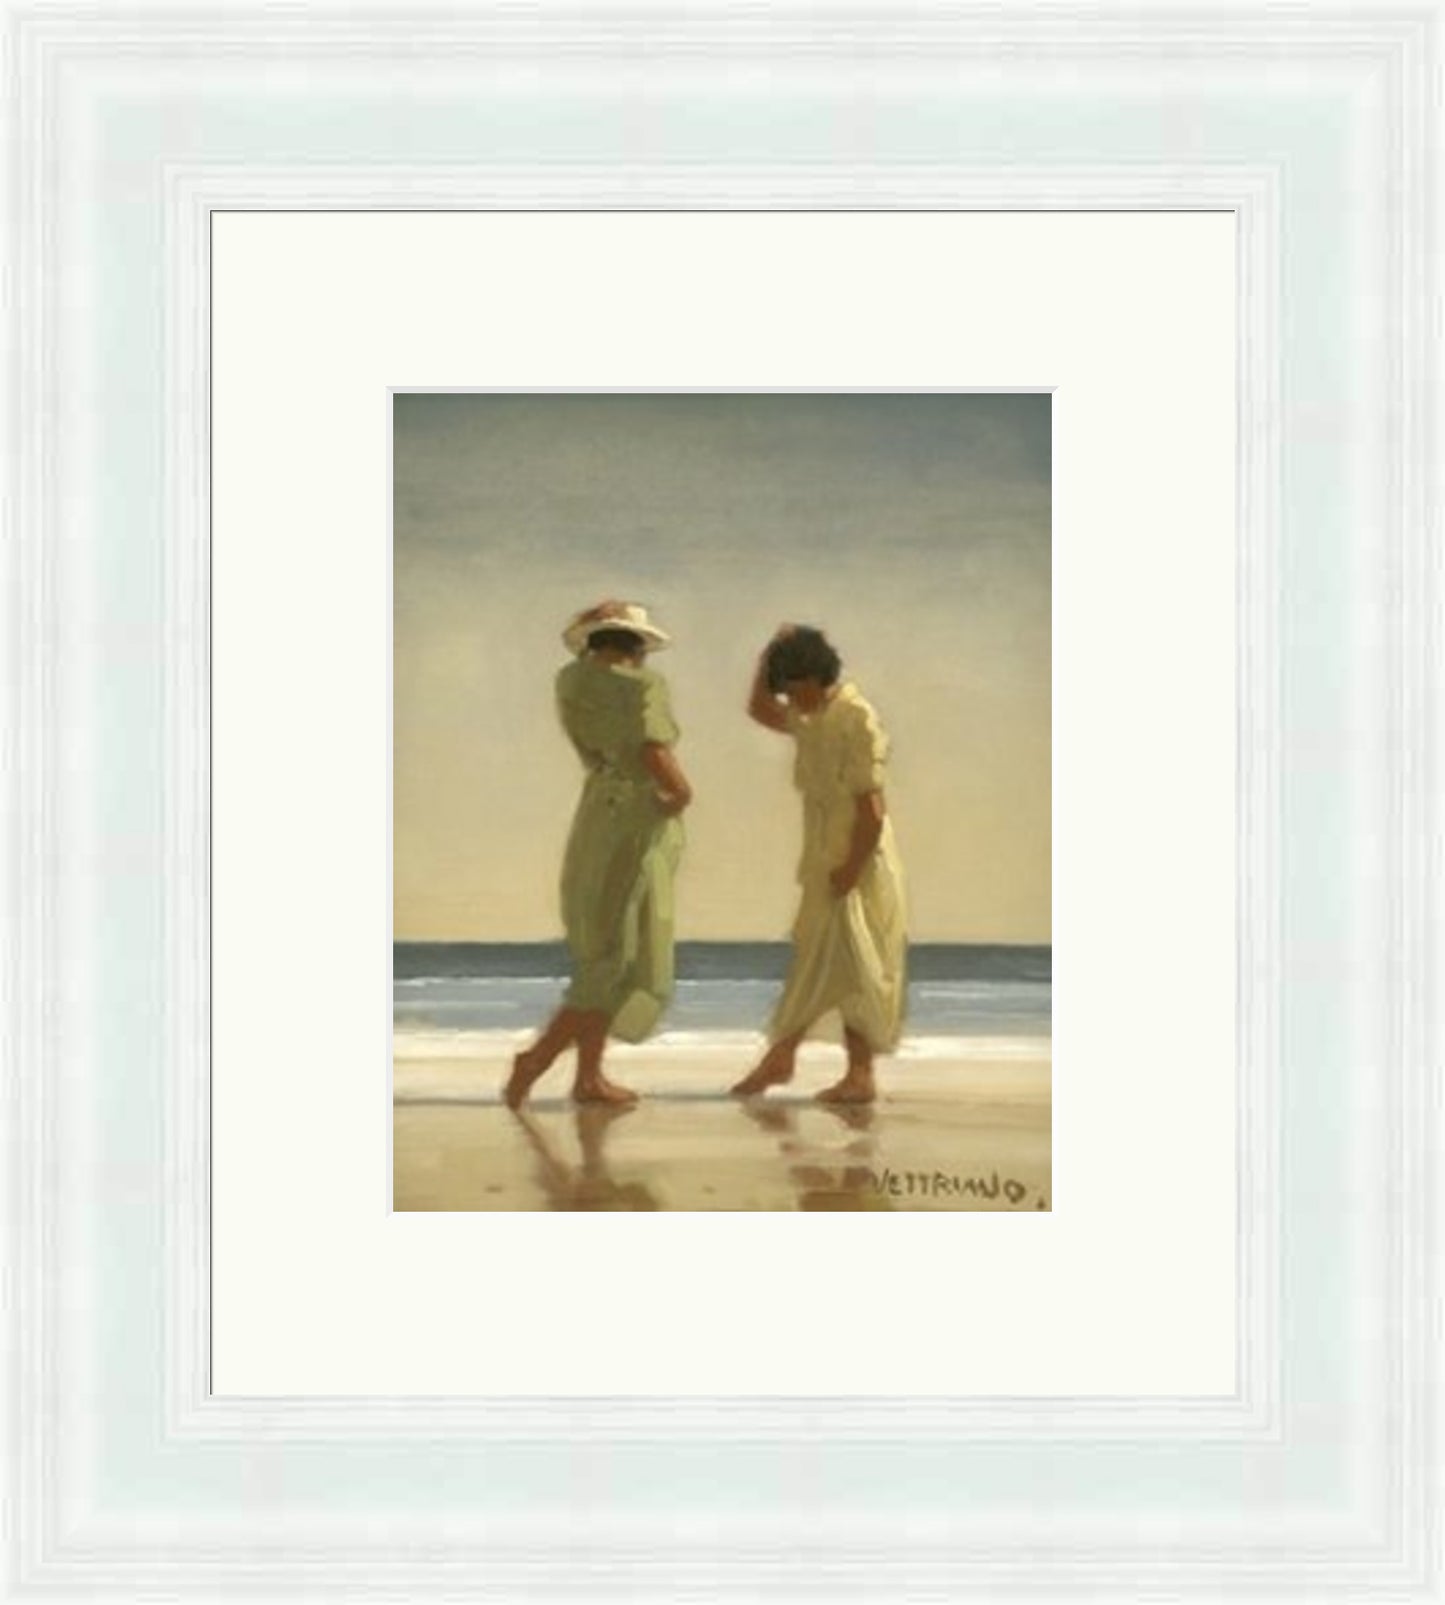 Trailing Toes by Jack Vettriano